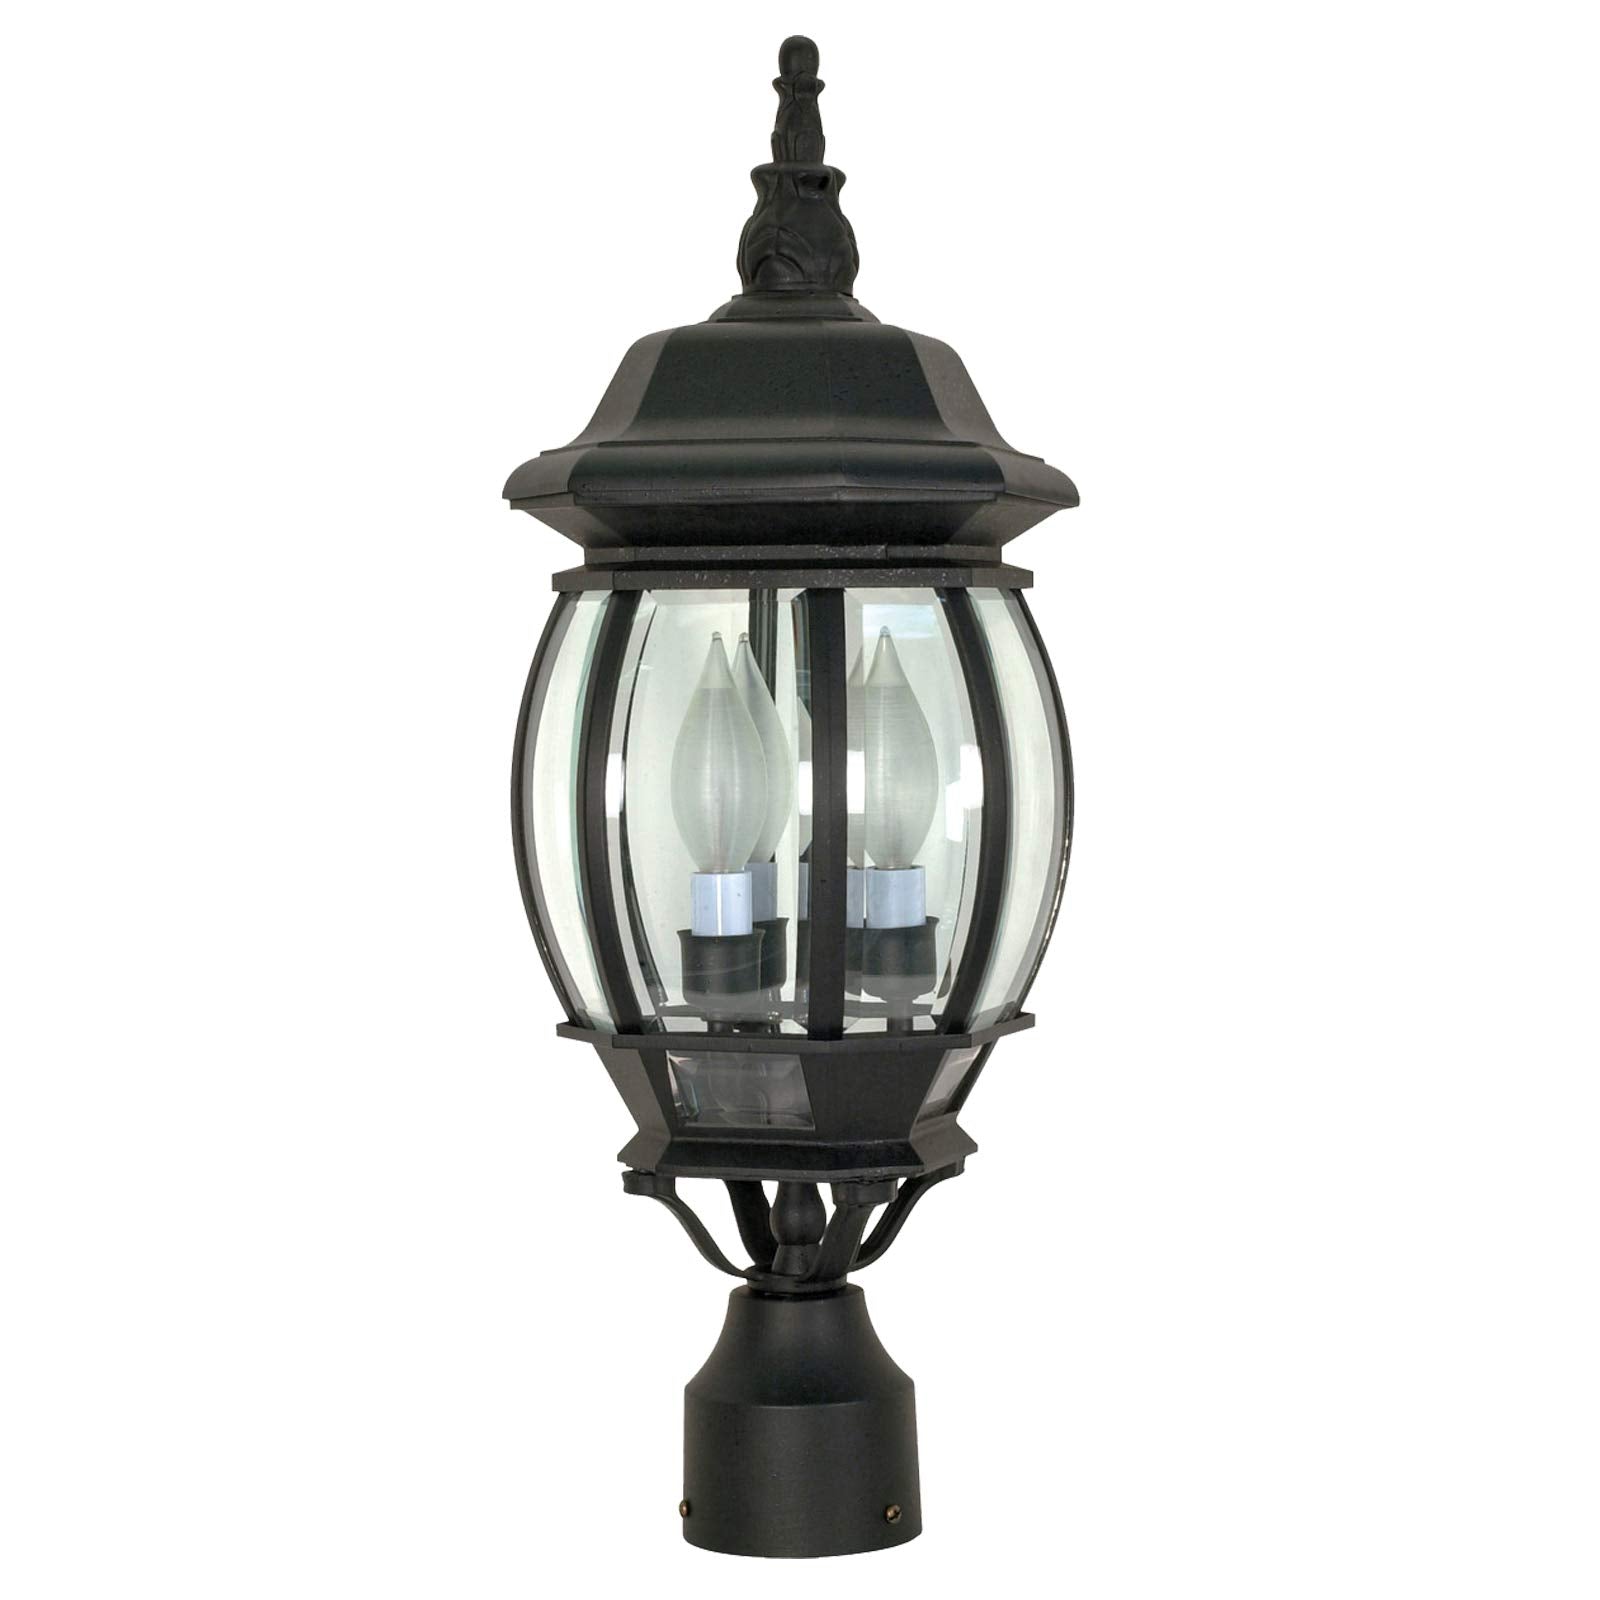 Ciata Lighting 3 Light Outdoor Aluminium 21 inch Outdoor Post Lantern, Clear Glass Shade Voltage: 120, Wattage: 60, Clear Beveled Glass Panels.  - Like New